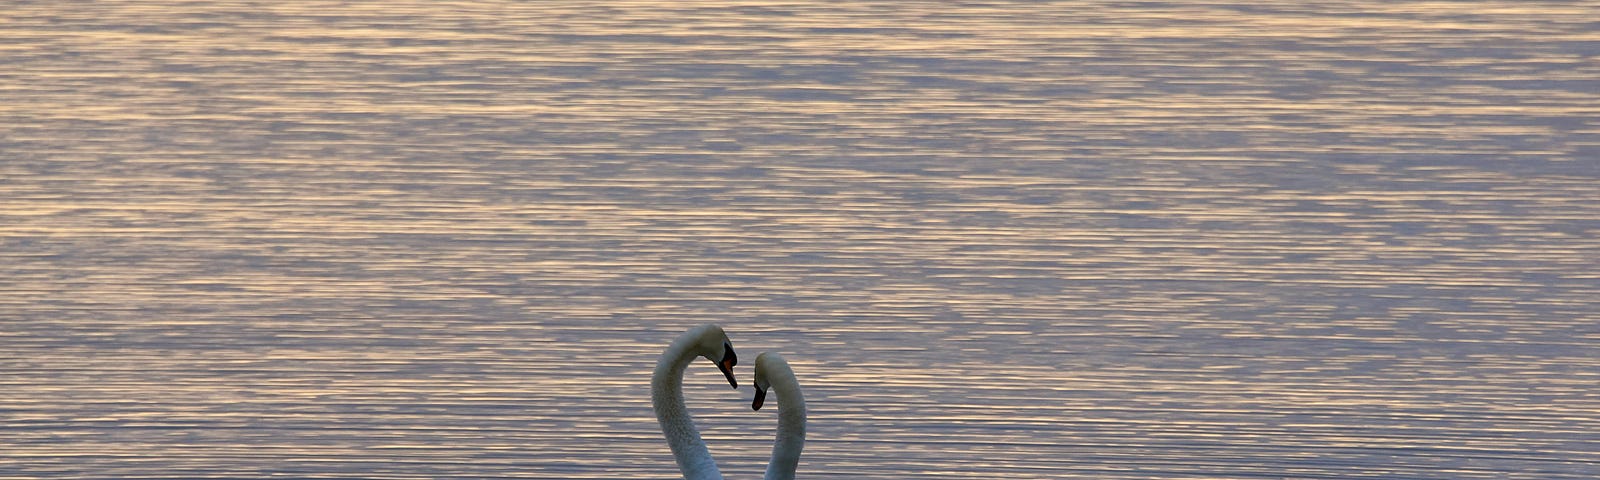 two swans closed in a half embrace